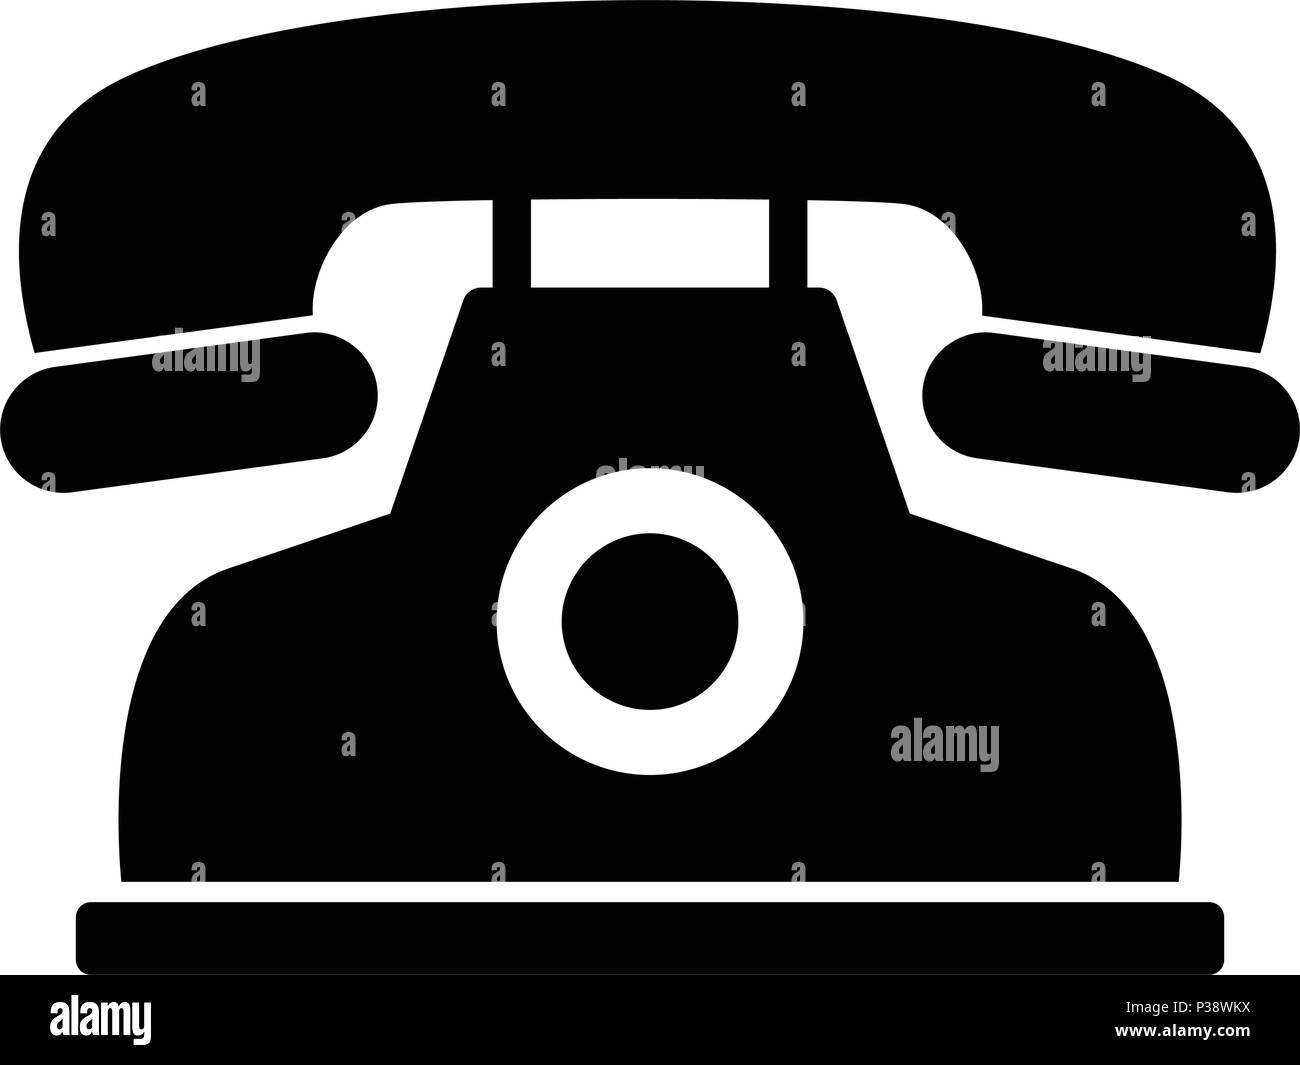 Telephone silhouette. Business icon Stock Vector